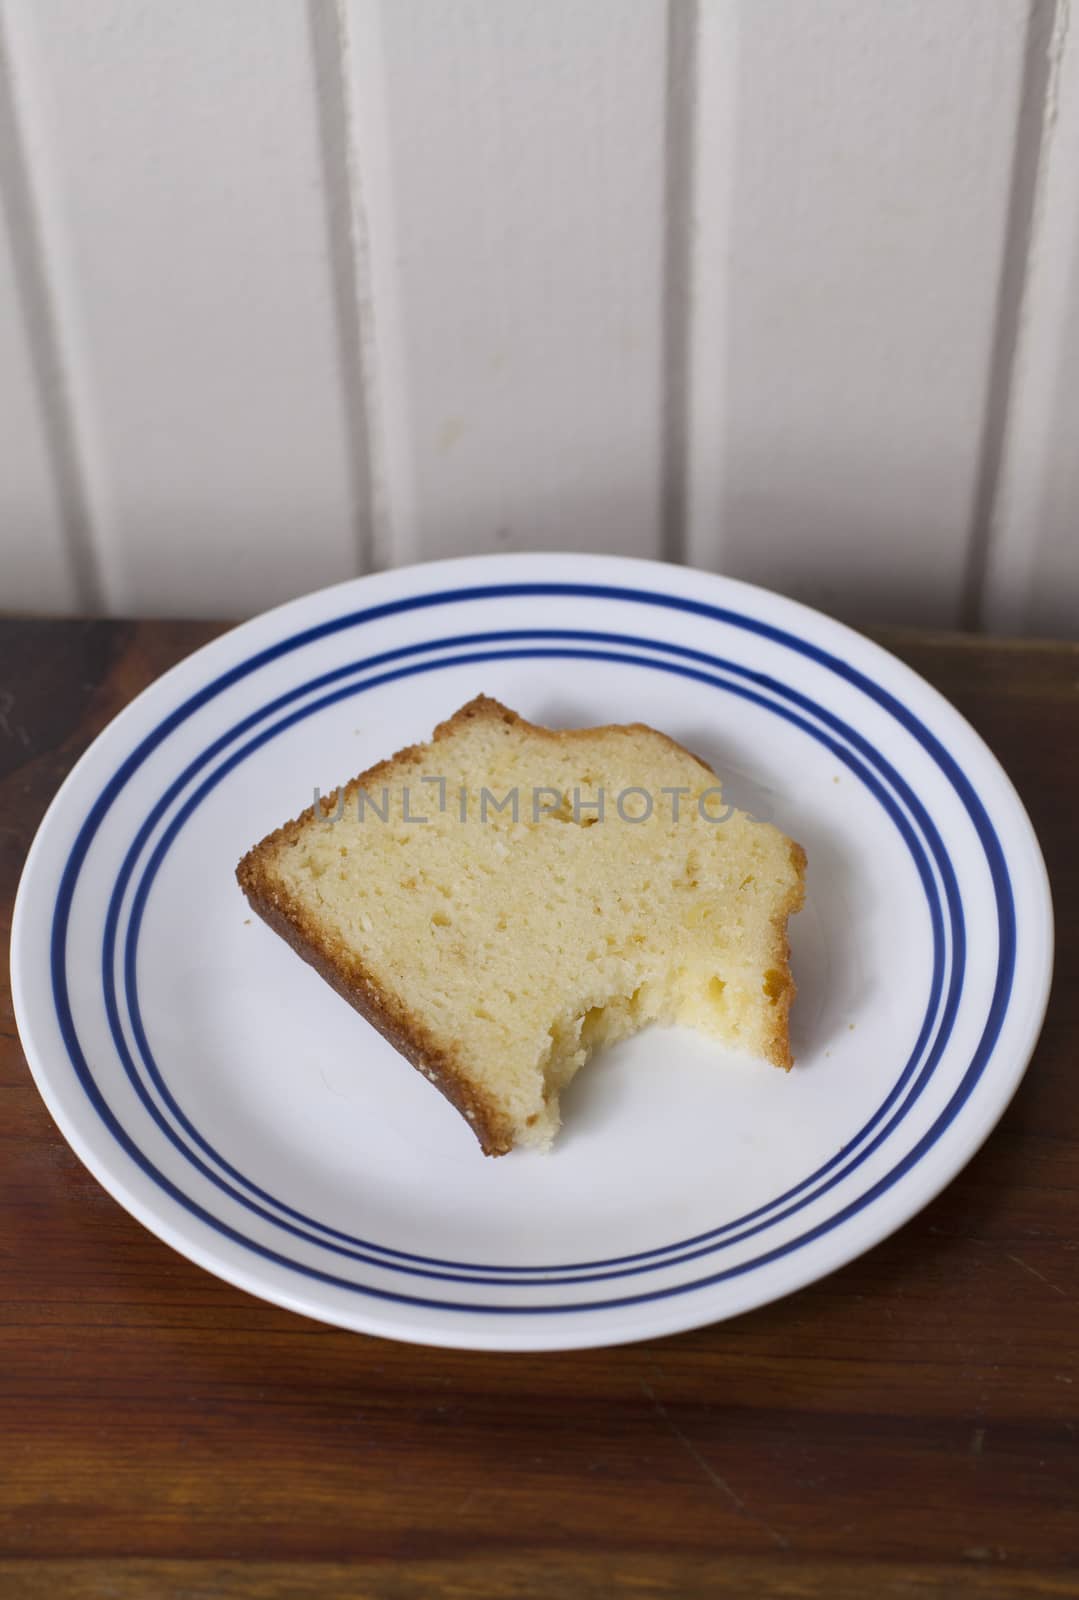 A single slice of pound cake with a bite taken out